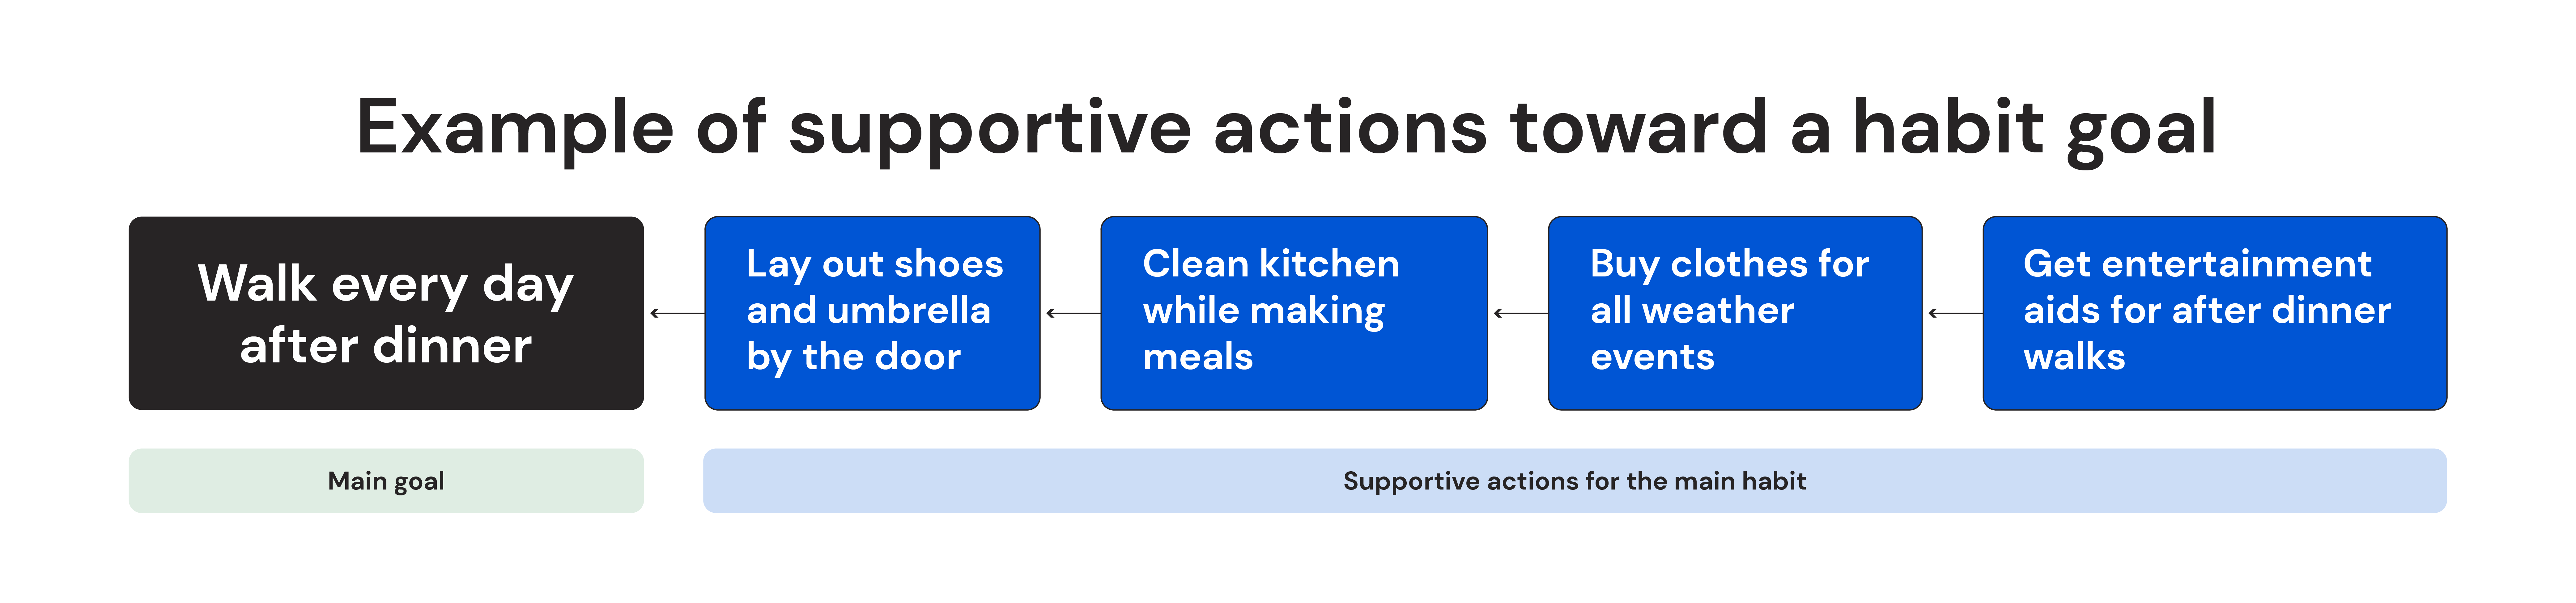 Example of supportive actions toward a habit goal